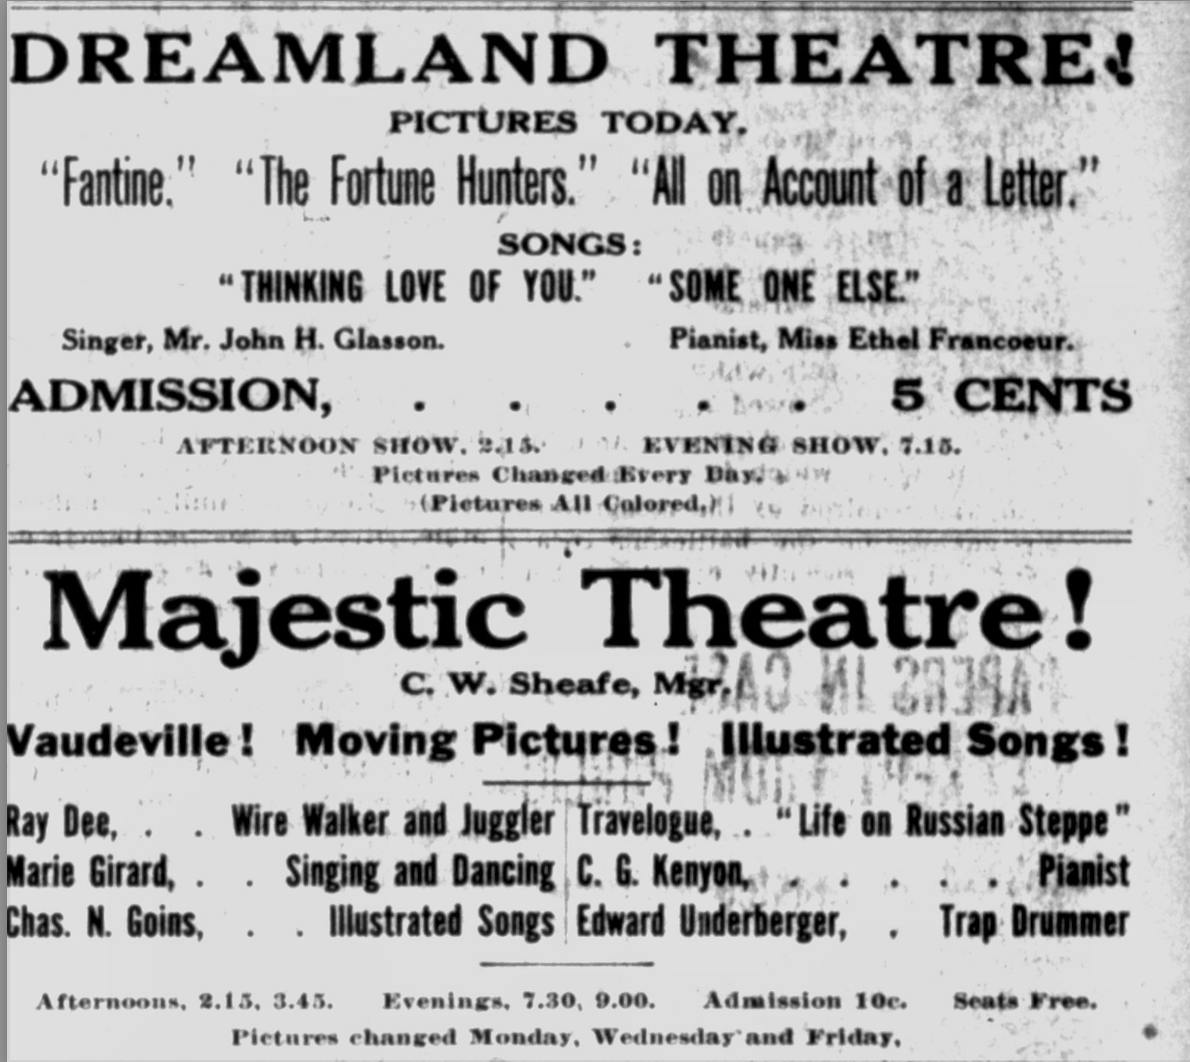 Advertisement for Charles N. Goins' performance at the Majestic Theatre